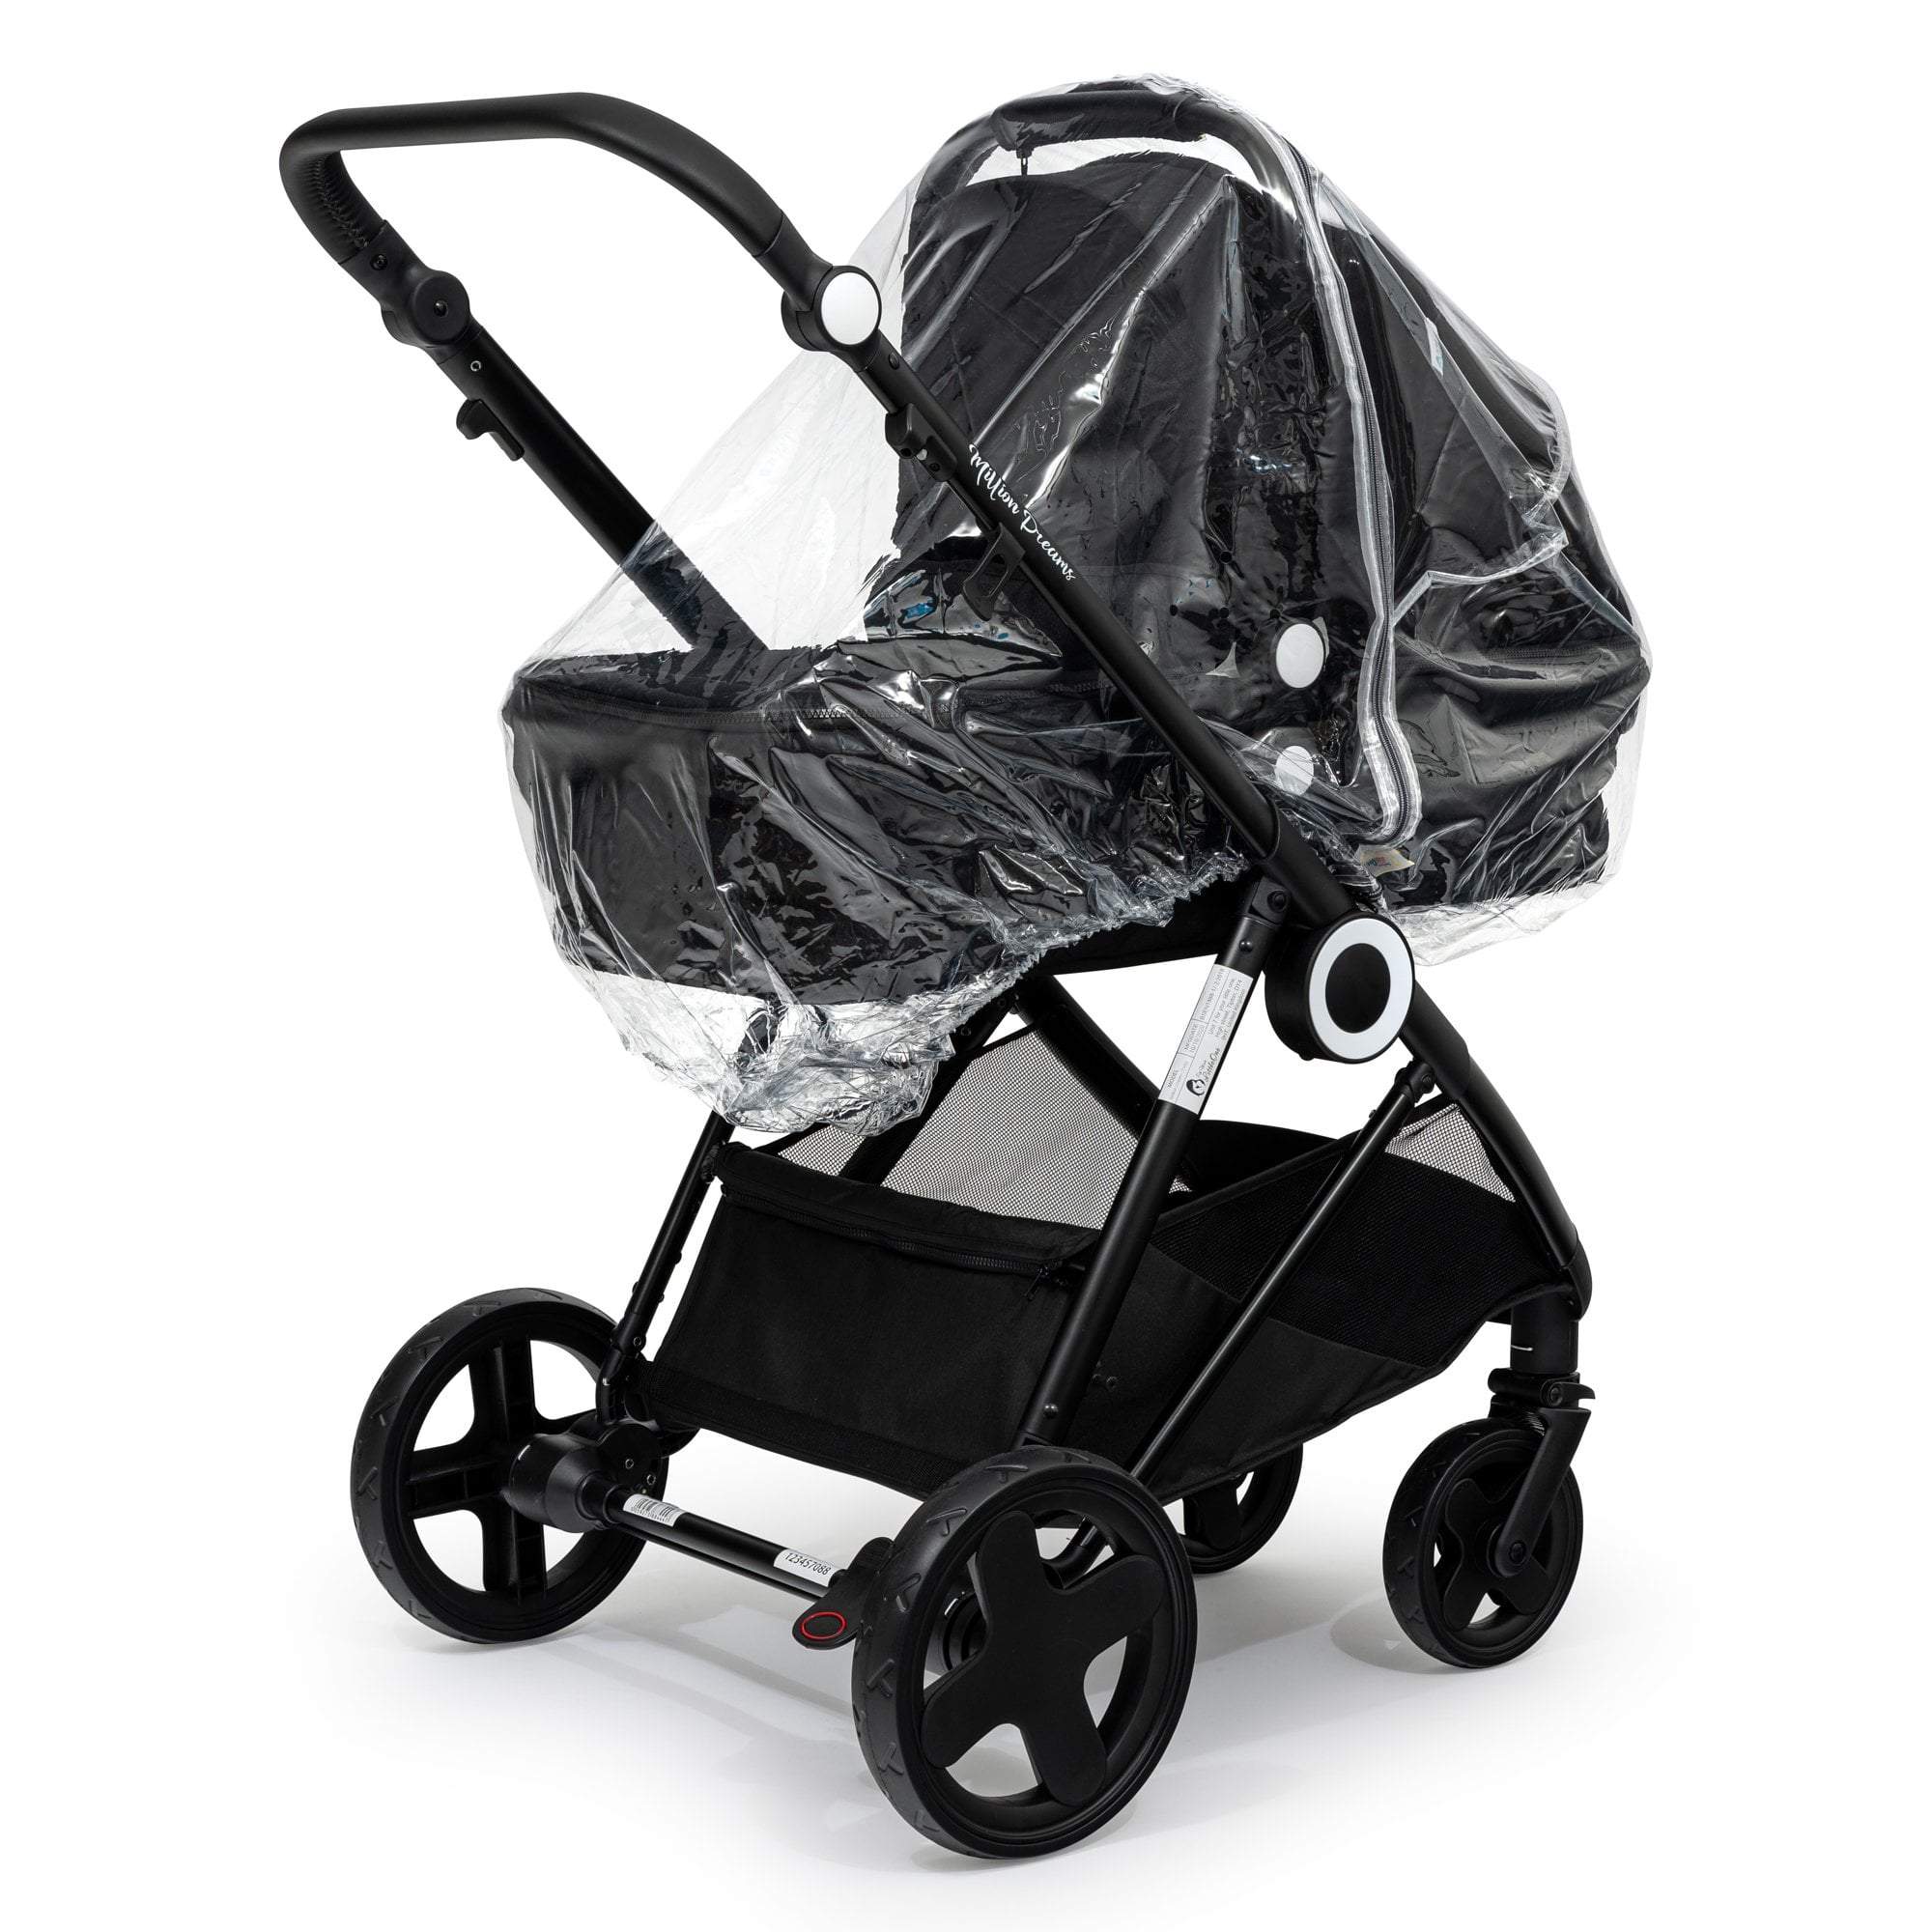 Carrycot Raincover Compatible With Formula - Fits All Models - For Your Little One